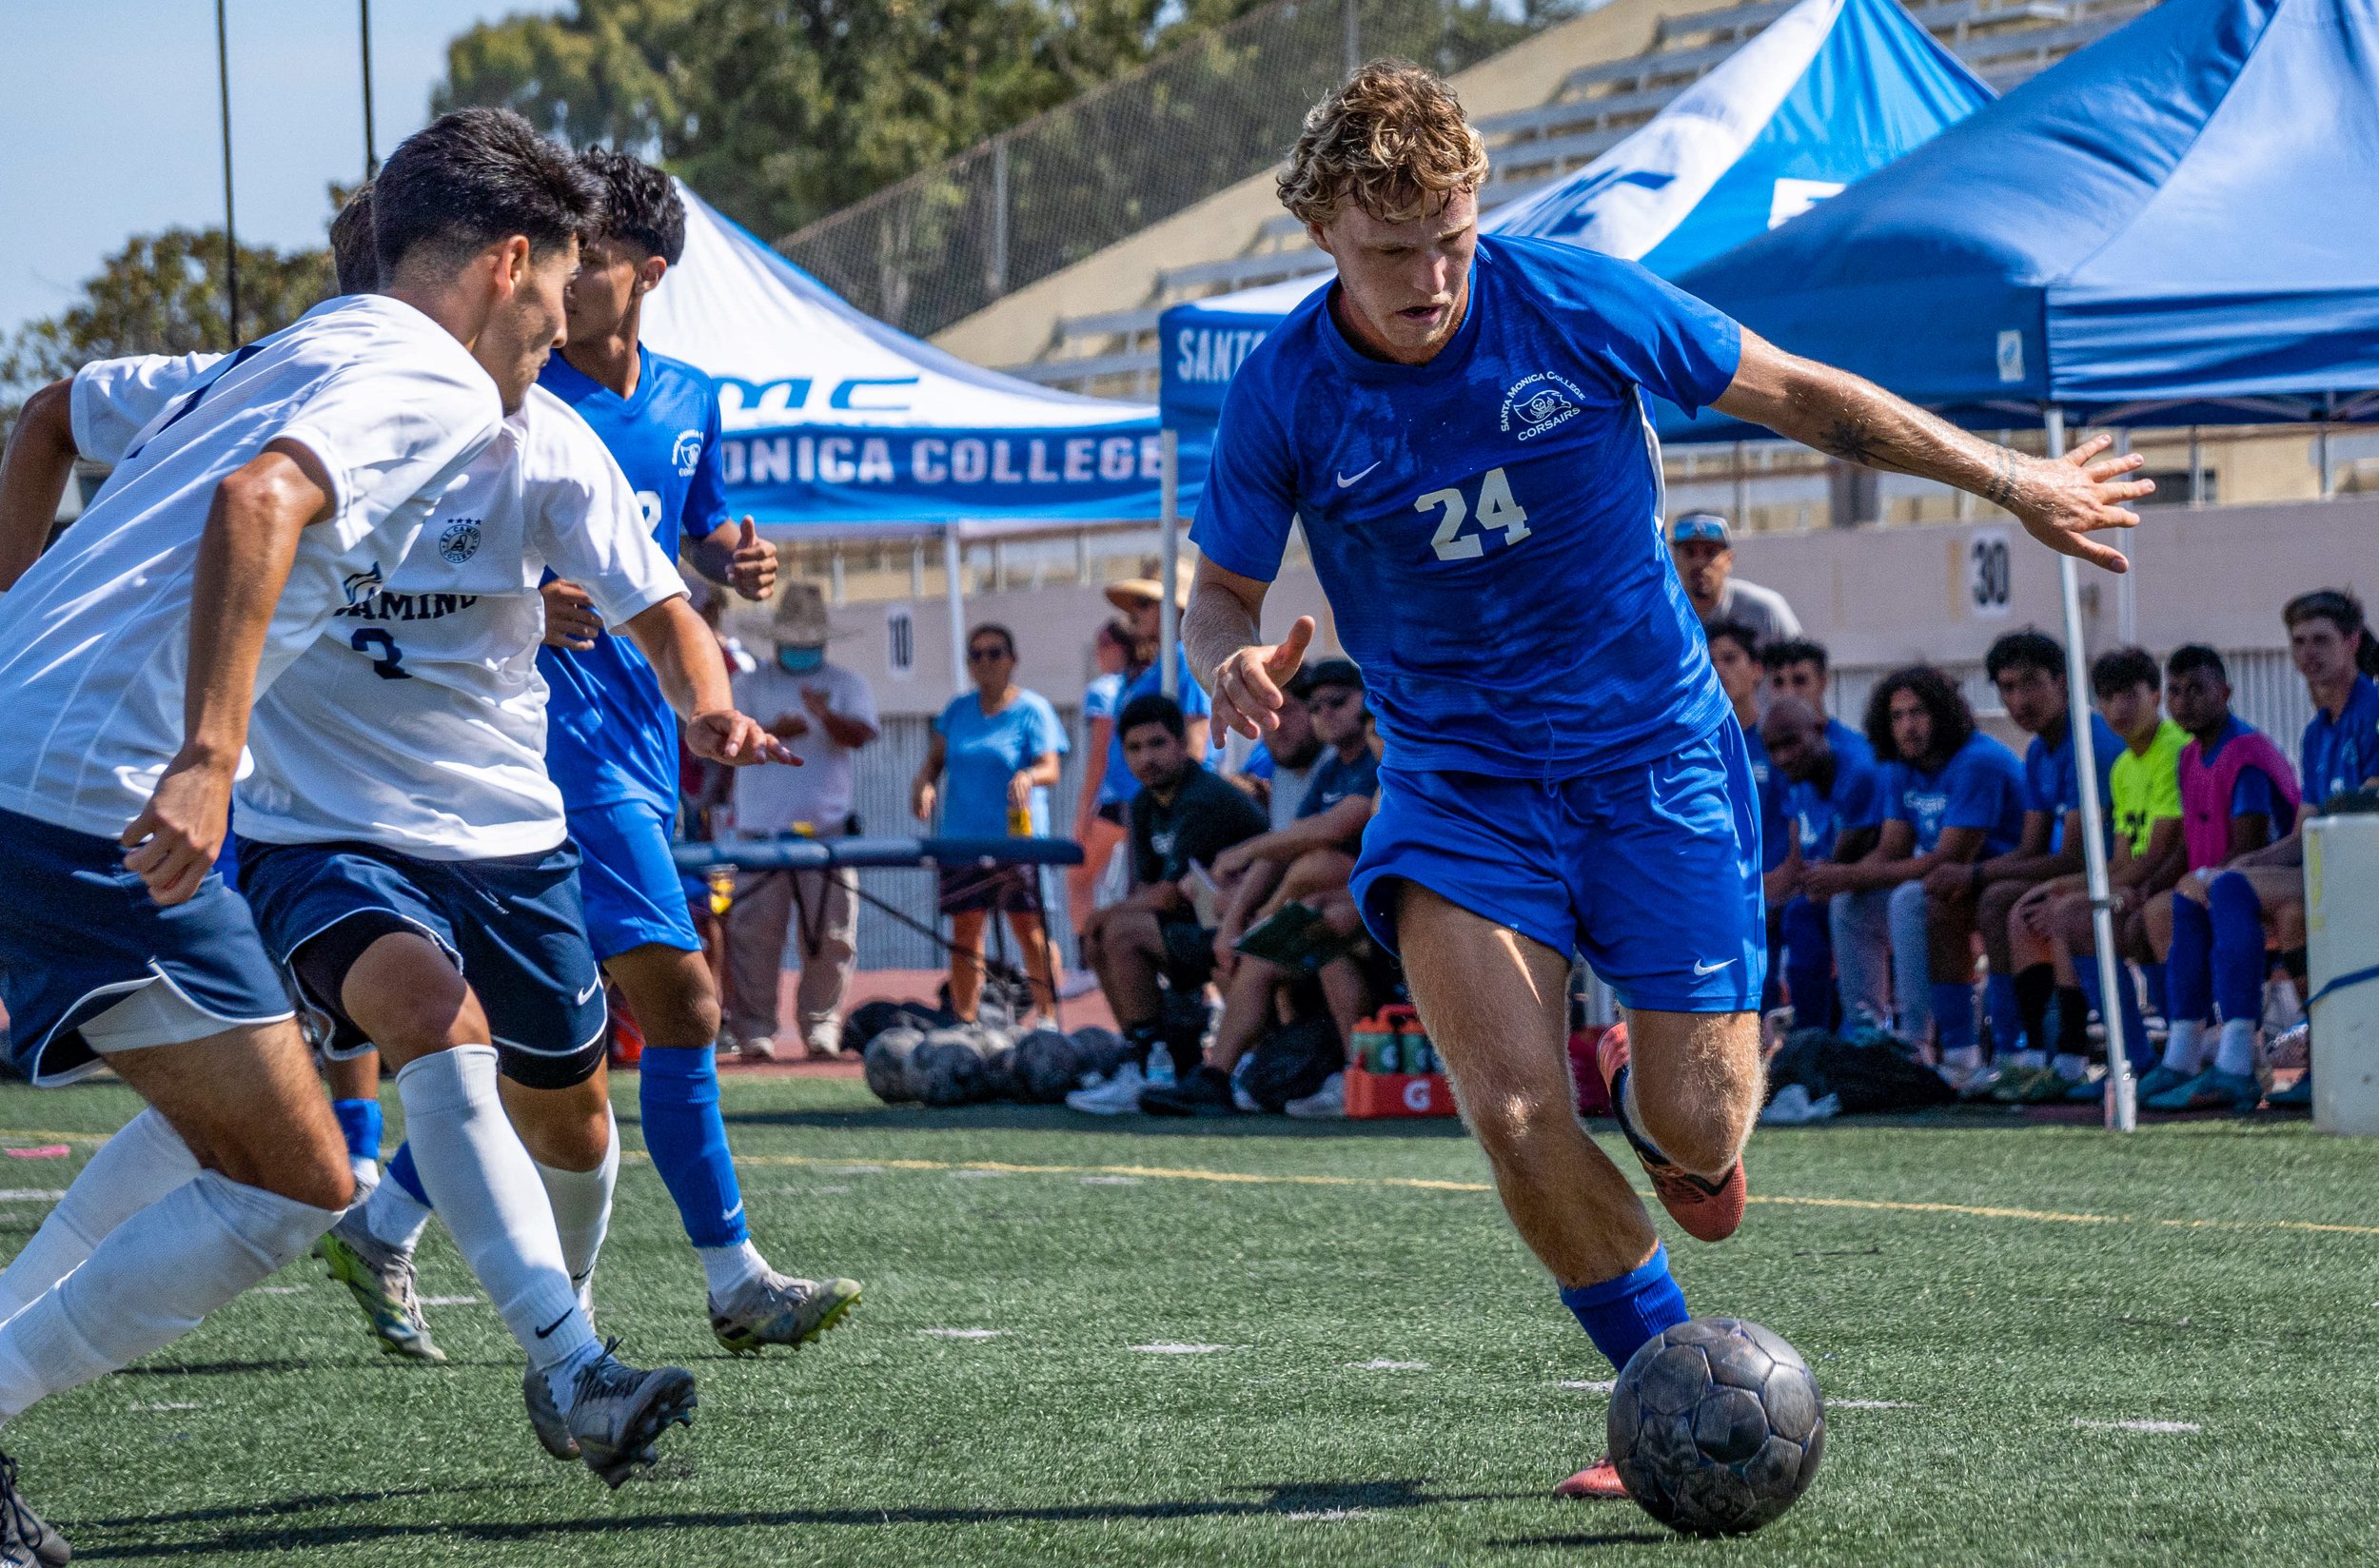  El Camino Warriors storm in from the side as Alexander Lalor (24) rushes in for a kick while his coach and the teammates watch anticipatedly from the sidelines. Lalor later scored SMC’s first goal during the matche’s first half. The Corsair Field in